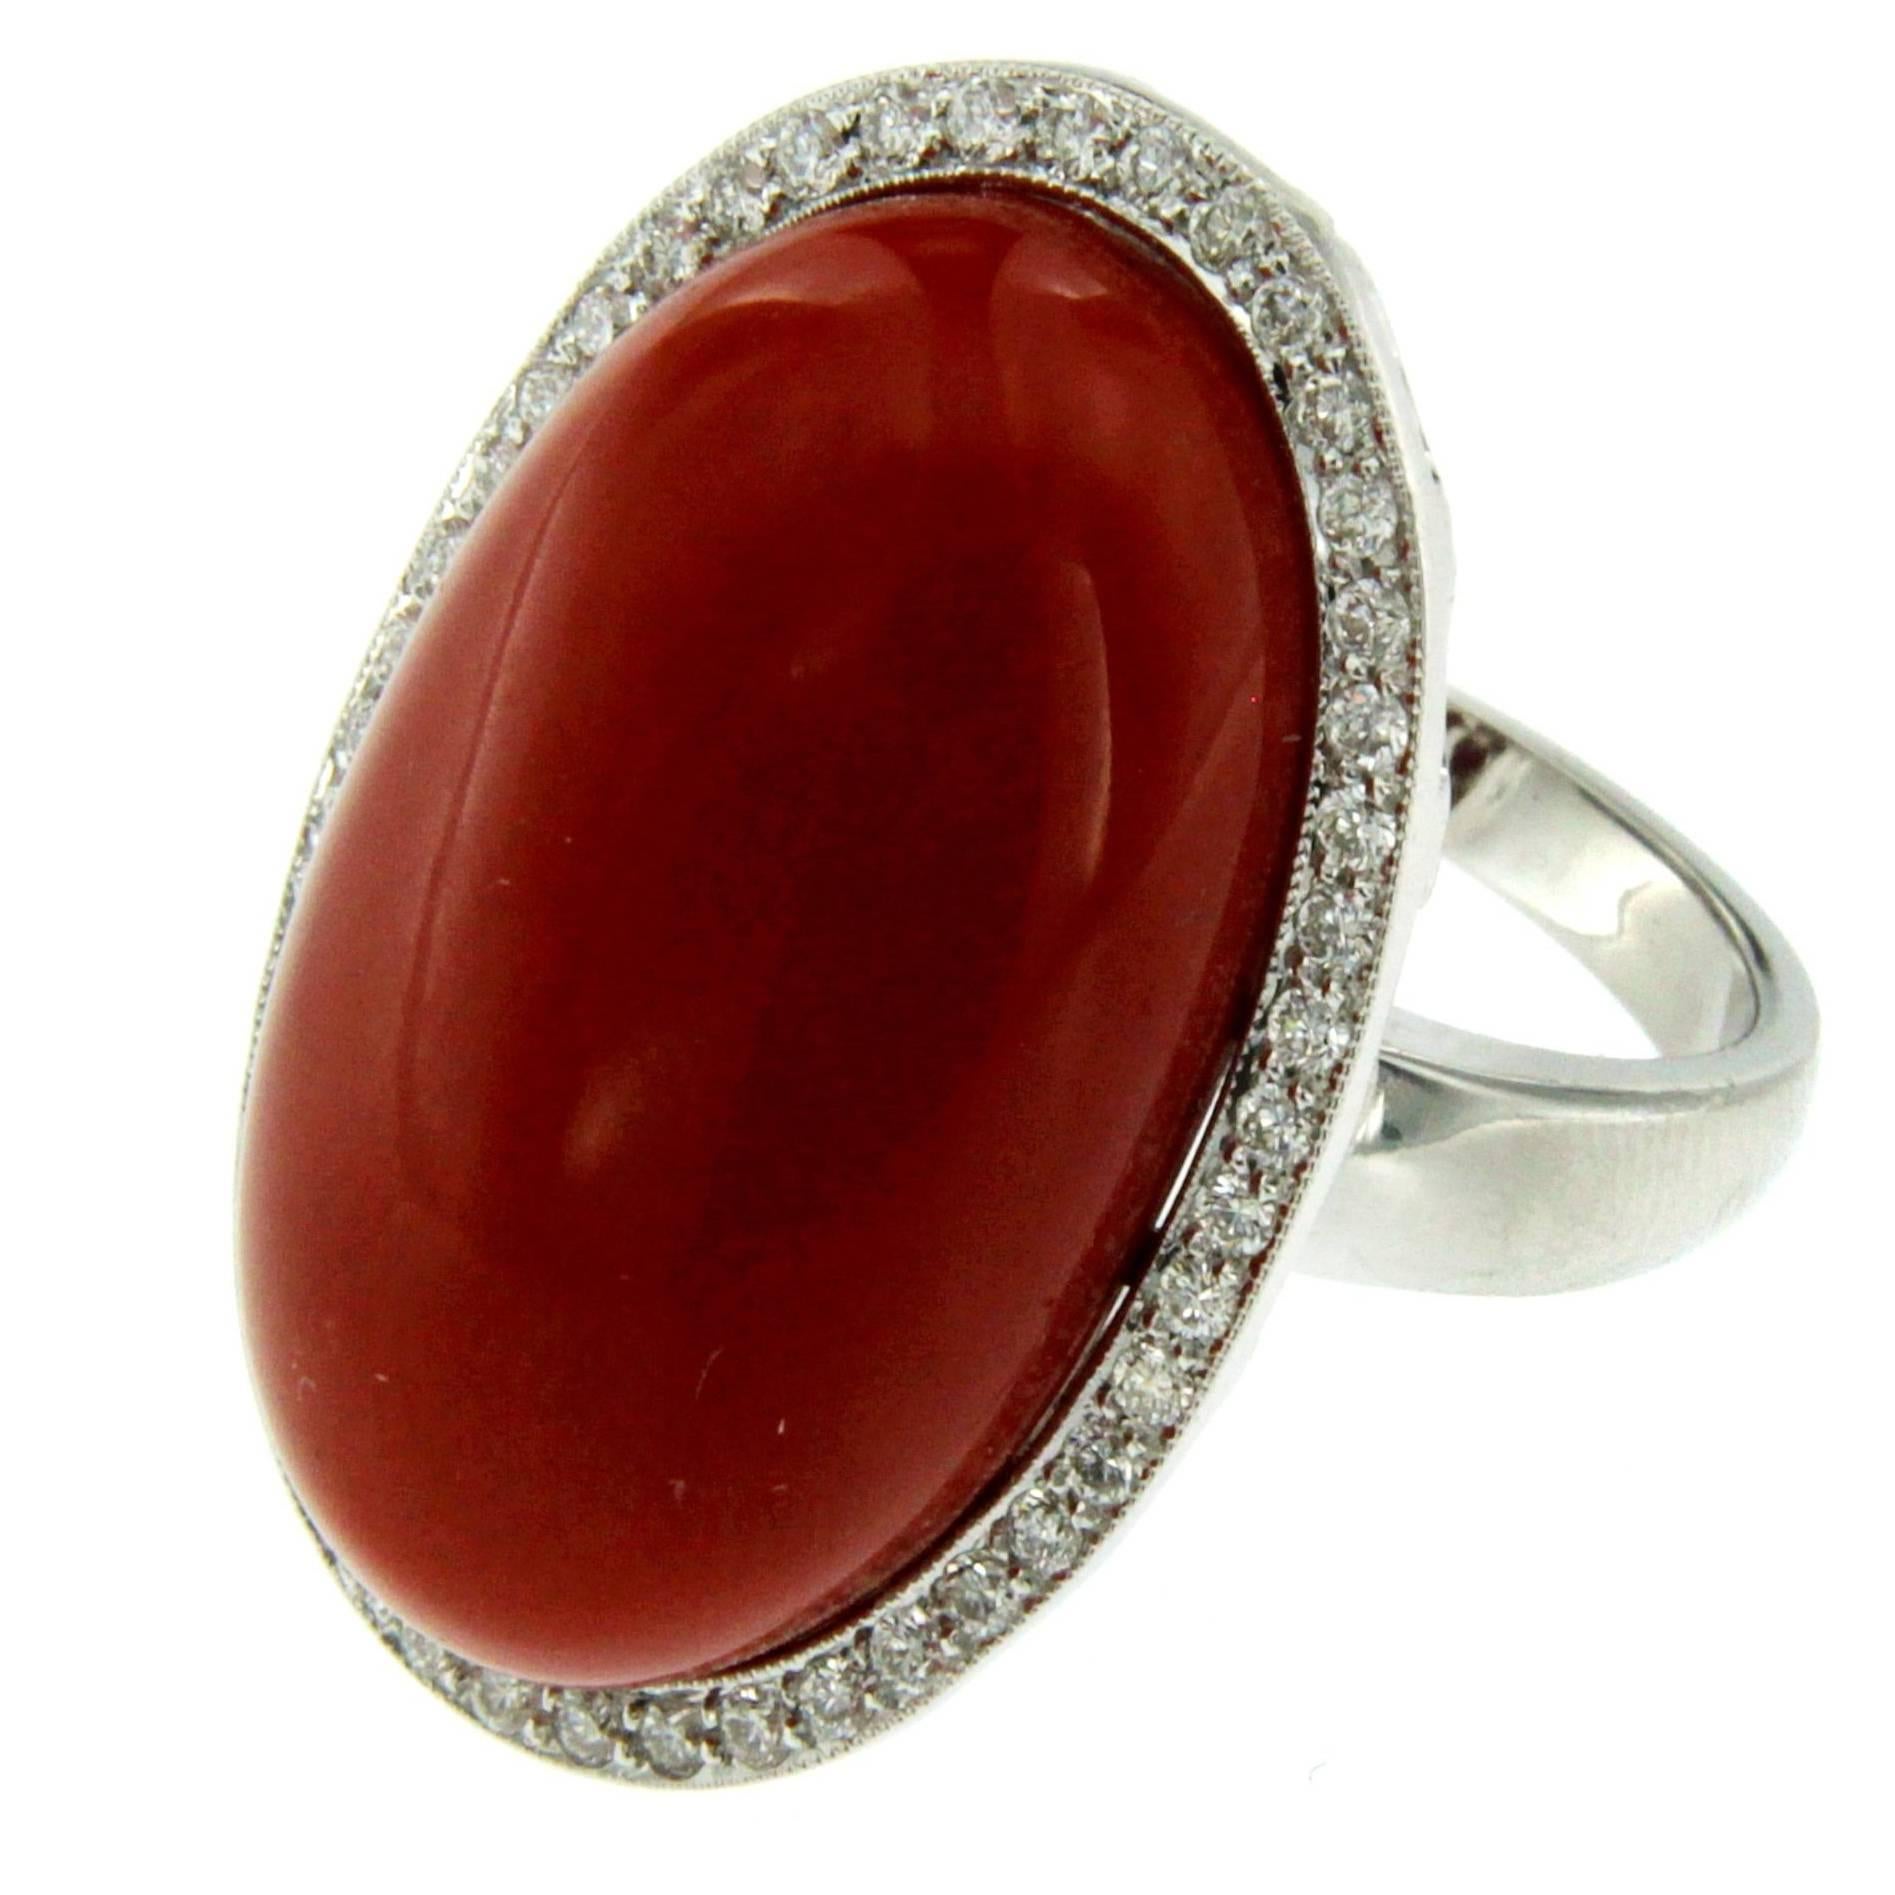 Truly exclusive vintage ring out from 1960s origin Italy, hand crafted of solid 18Kt white gold. 
The ring features a Natural Cabochon Mediterranean Coral, of the greatest quality, 100% natural not dyed or worked with any resin or other synthetic